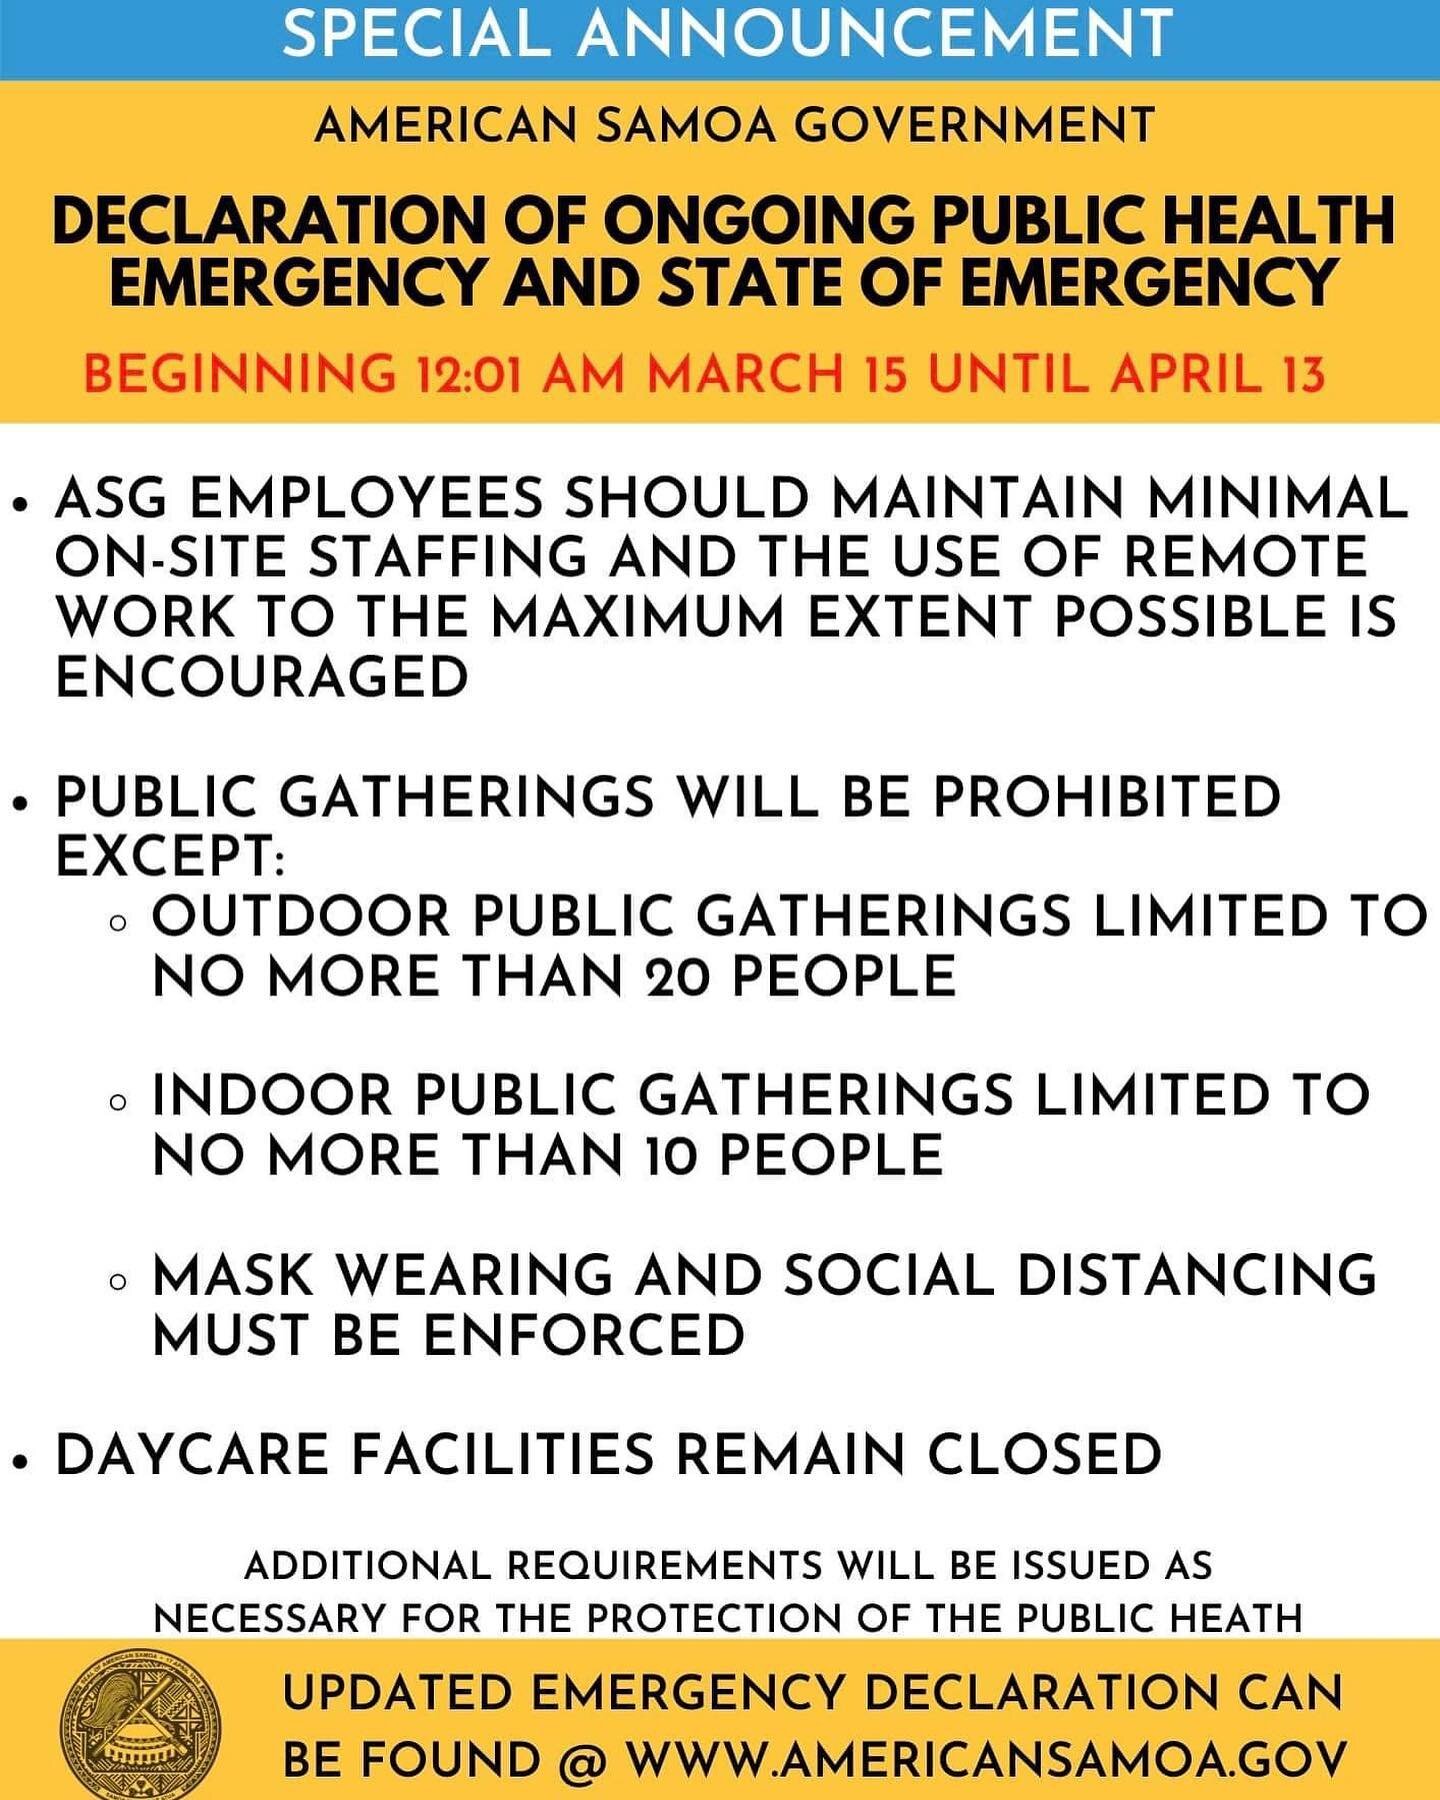 Public Notice: The new American Samoa &ldquo;Declaration of Ongoing Public Health Emergency and State of Emergency&rdquo; will start at midnight tonight and last until April 13th. 

More info can be found at www.American Samoa.gov. 🇦🇸

#AmericanSam